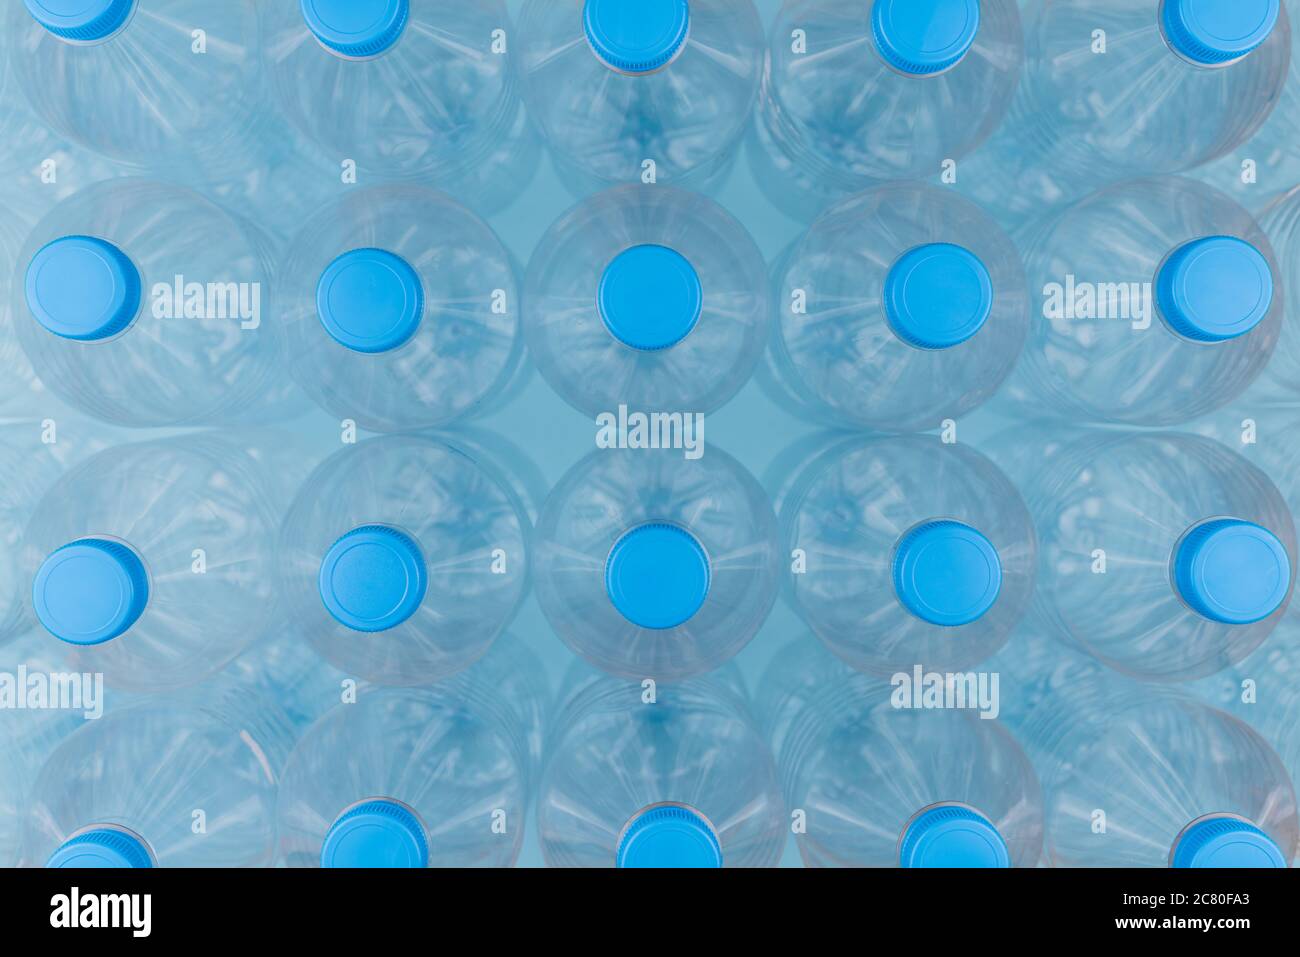 Horizontal color image with an overhead view of an empty clear plastic bottles with caps stacked on a blue background. Recycling and environment conce Stock Photo